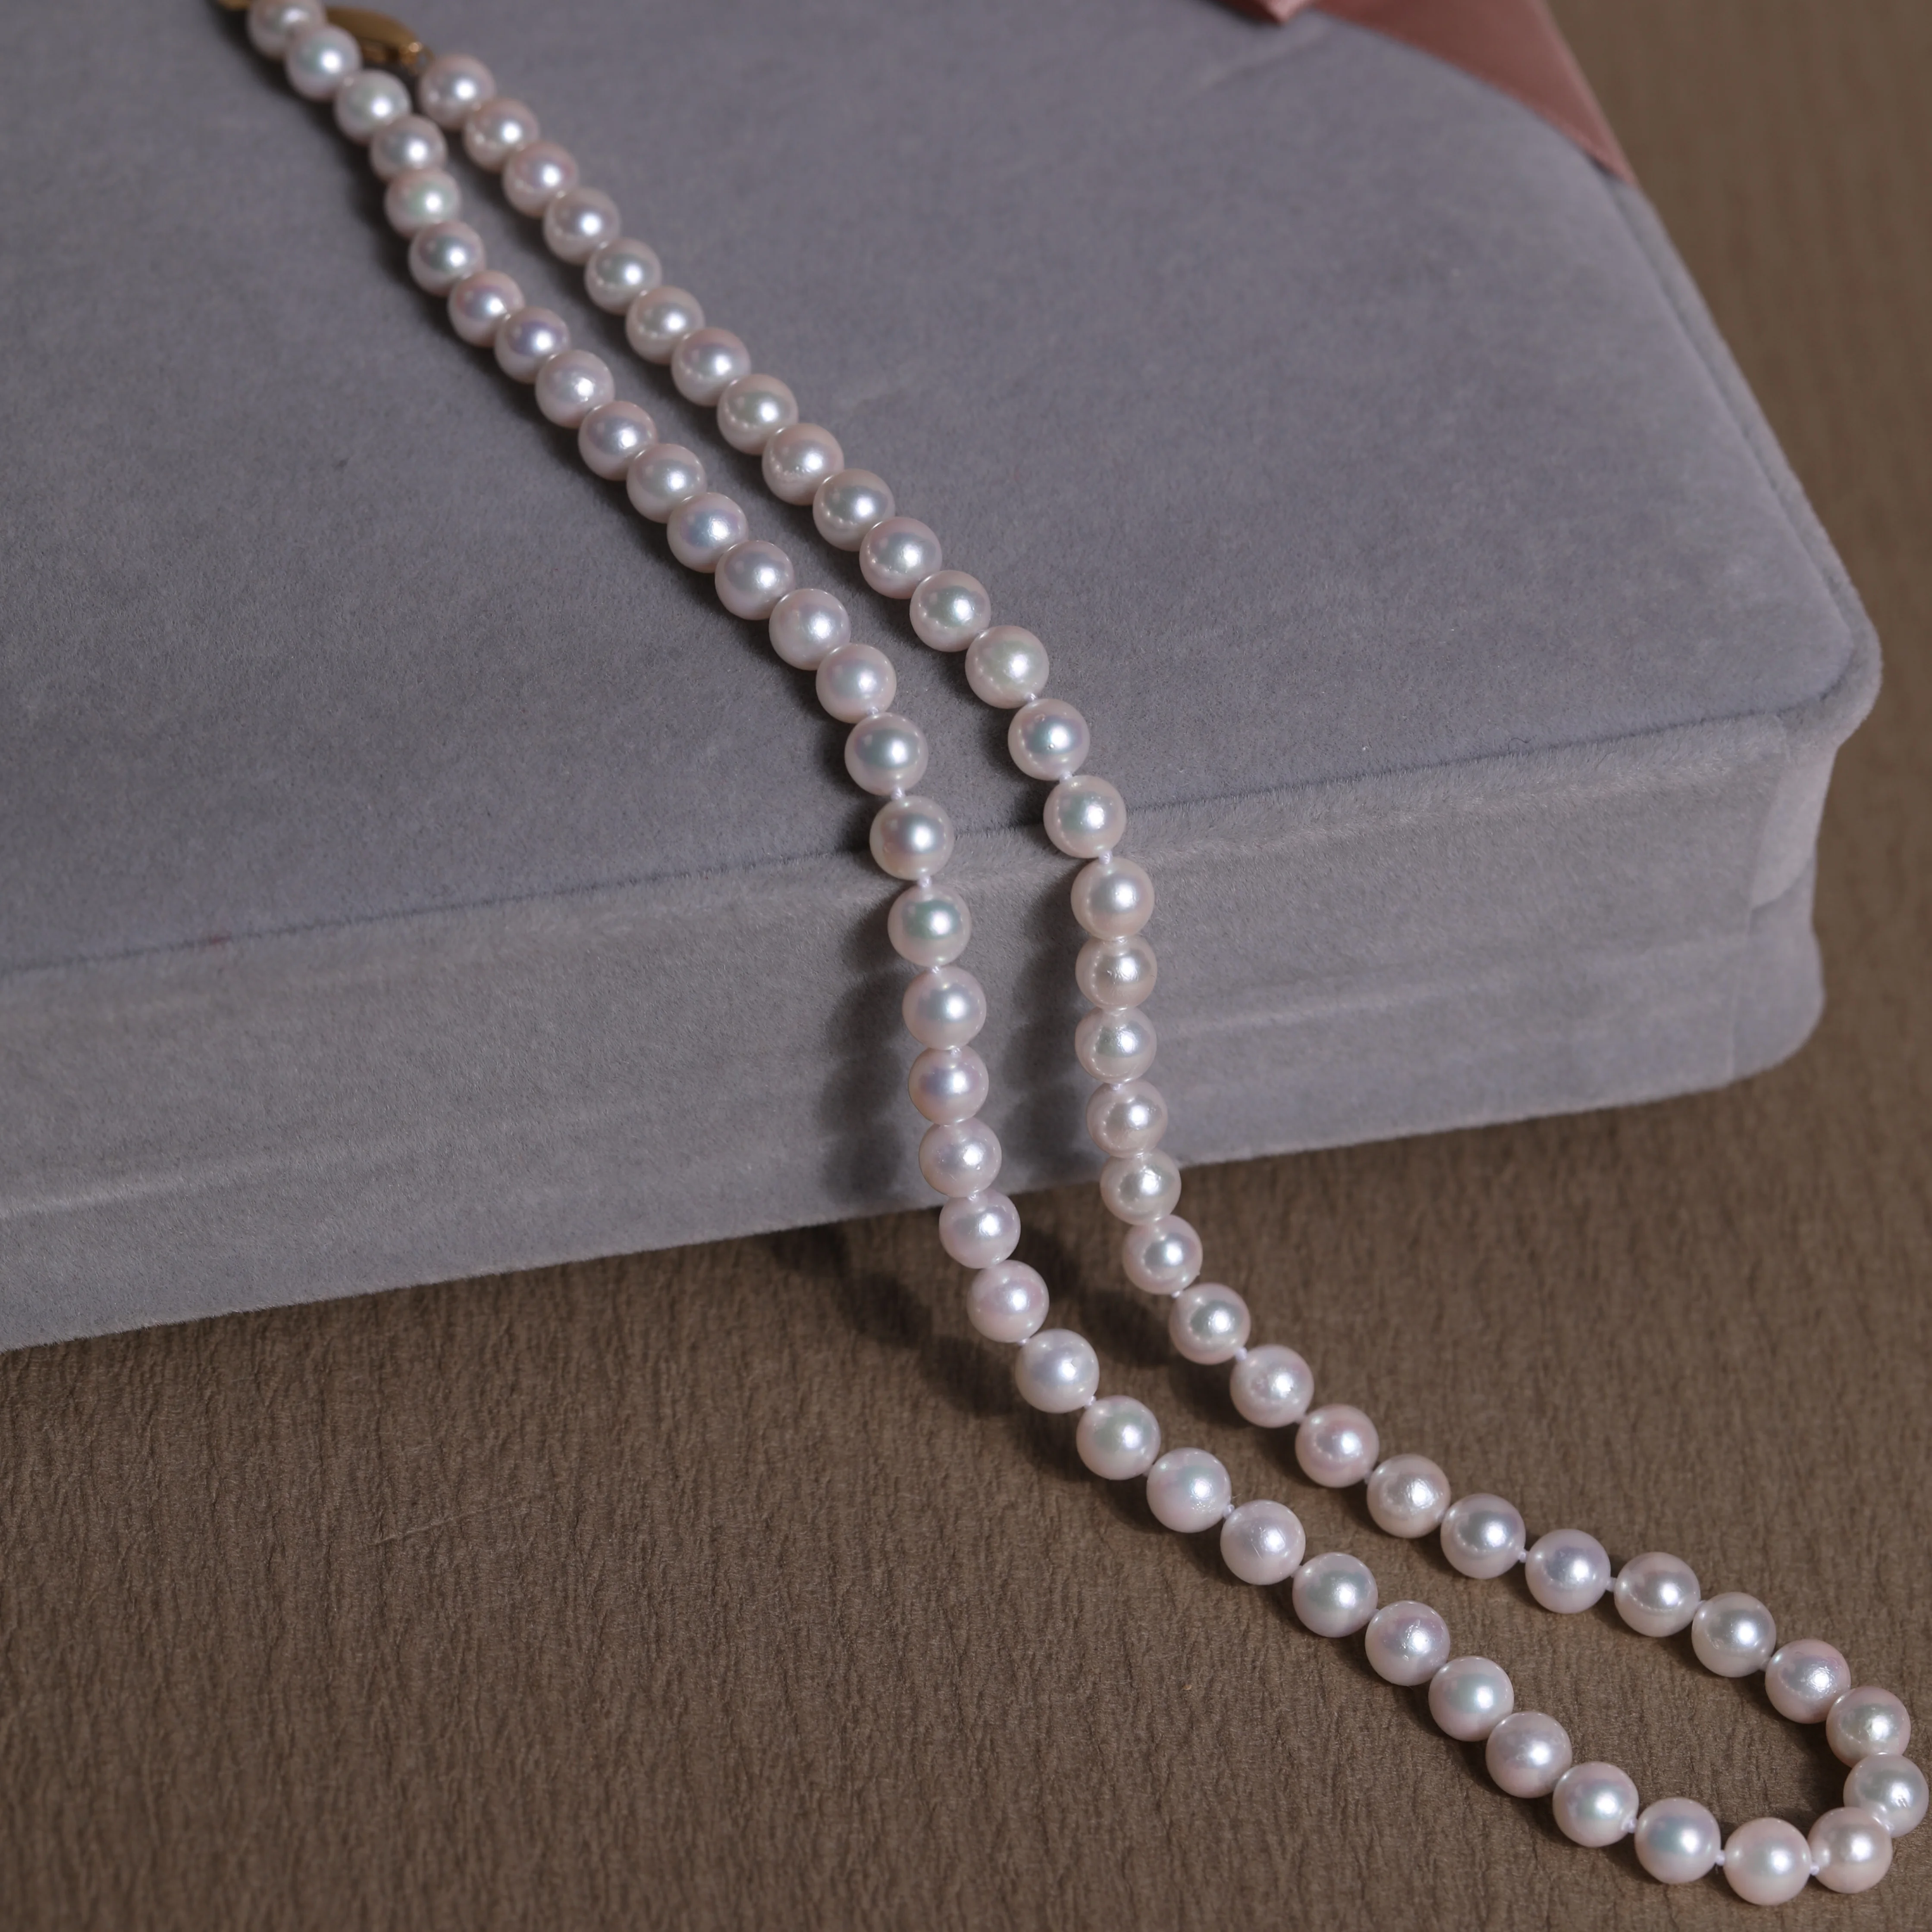 

Japan Saltwater Akoya Pearls Strand with 14K/18K Gold Clasp Round Pink Luster Pearls 18 INches Pearl Strand 6-6.5mm, White/pink